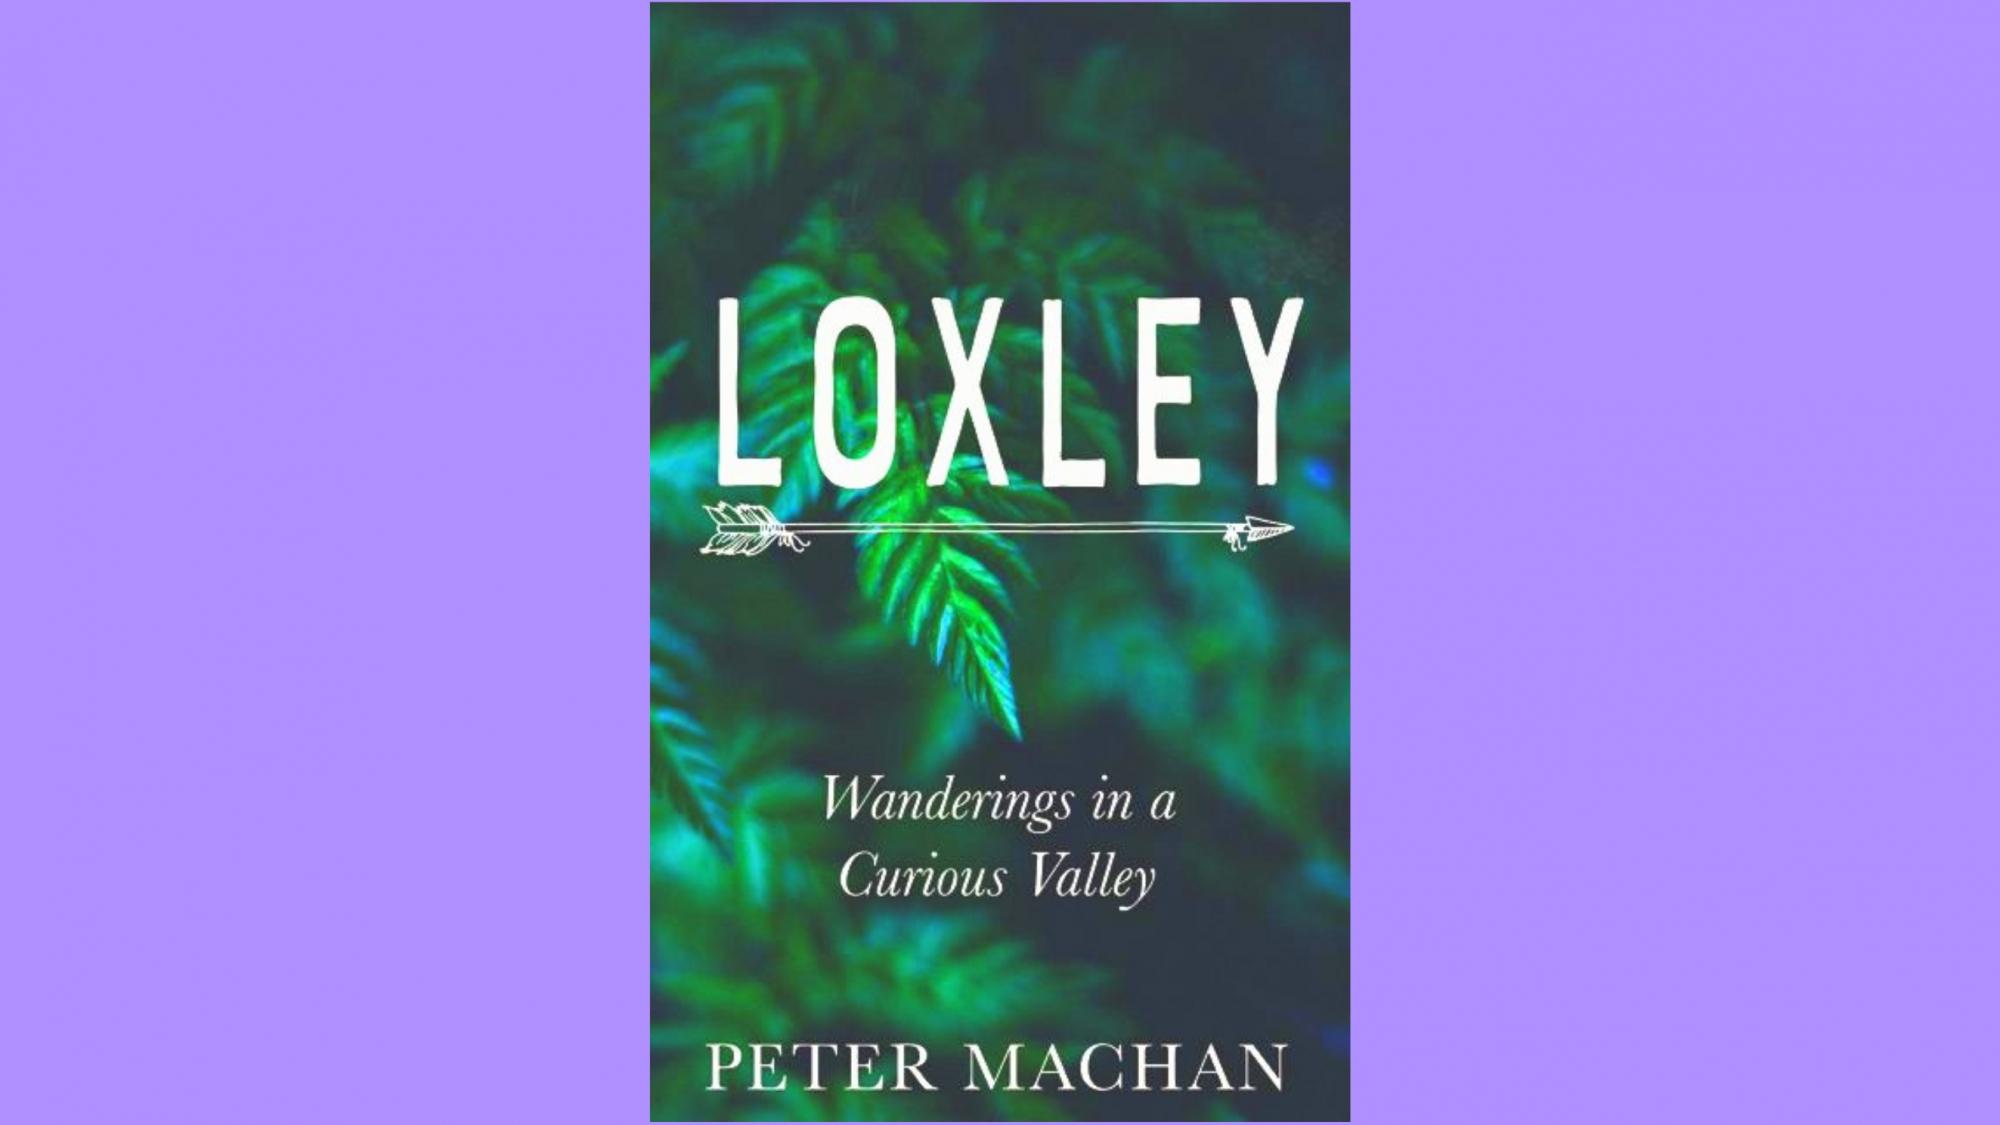 Loxley by Peter Machan (book cover)